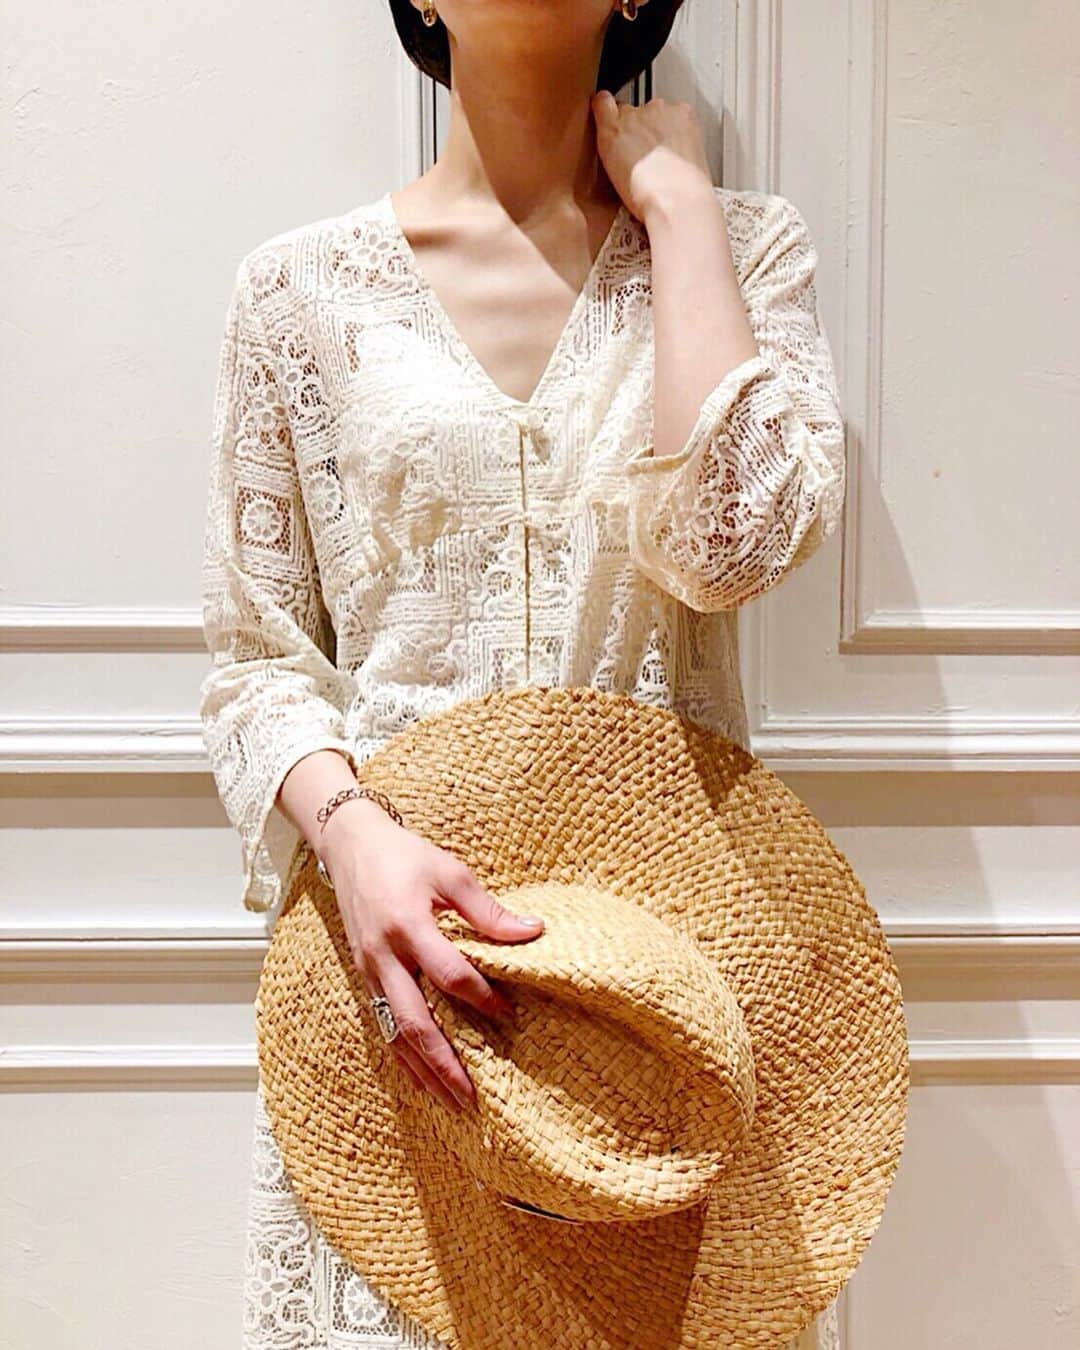 IÉNA LA BOUCLEさんのインスタグラム写真 - (IÉNA LA BOUCLEInstagram)「recommend lace series!﻿ ﻿ ﻿ IENA LA BOUCLEの﻿ おすすめlace item﻿ をご紹介いたします♥﻿ ﻿ --------------------------------﻿﻿﻿﻿﻿﻿﻿﻿﻿﻿﻿﻿ 2.3.4枚目﻿ onepiece【IENA LA BOUCLE】﻿ ¥30,000+tax﻿﻿﻿ col:ホワイト﻿ no.19040914105020﻿ ﻿ pants【IENA LA BOUCLE】﻿ ¥19,000+ tax﻿ col:ナチュラル.ブラック.イエロー﻿ no.19030914129020﻿ ﻿ shoes【ROCHAS】﻿ ¥66,000+ tax﻿ size:36.37.38﻿ no.19093910009410﻿ ﻿ 5枚目﻿ blouse【IENA LA BOUCLE】﻿ ¥18,000+ tax﻿ col:ブラック.ホワイト.ブルー﻿ no.19051914131020﻿ ﻿ pants【IENA LA BOUCLE】﻿ ¥20,000+ tax﻿ col:ブルー﻿ size:34.36.38.40﻿ no.19030914143020﻿ ﻿ shoes【ROCHAS】﻿ ¥86,000+ tax﻿ size:36/5.37/5.38/5.39/5﻿ no.19093910003710﻿ ﻿ 6.7.8枚目﻿ onepiece【IENA LA BOUCLE】﻿ ¥26,000+ tax﻿ col:ホワイト.グレー﻿ no.19040914316020﻿ ﻿ shoes【SARTORE】﻿ ¥80,000+ tax﻿ size:36.37.38﻿ no.19093910009210﻿ ﻿ ﻿ #iena_la_boucle﻿﻿﻿﻿﻿﻿﻿﻿﻿﻿﻿﻿﻿﻿ #laboucle #iena﻿﻿﻿﻿﻿﻿﻿﻿﻿﻿﻿﻿﻿﻿ #boucle_19ss﻿﻿﻿﻿﻿﻿﻿﻿﻿﻿﻿」6月21日 21時39分 - iena.la.boucle.store